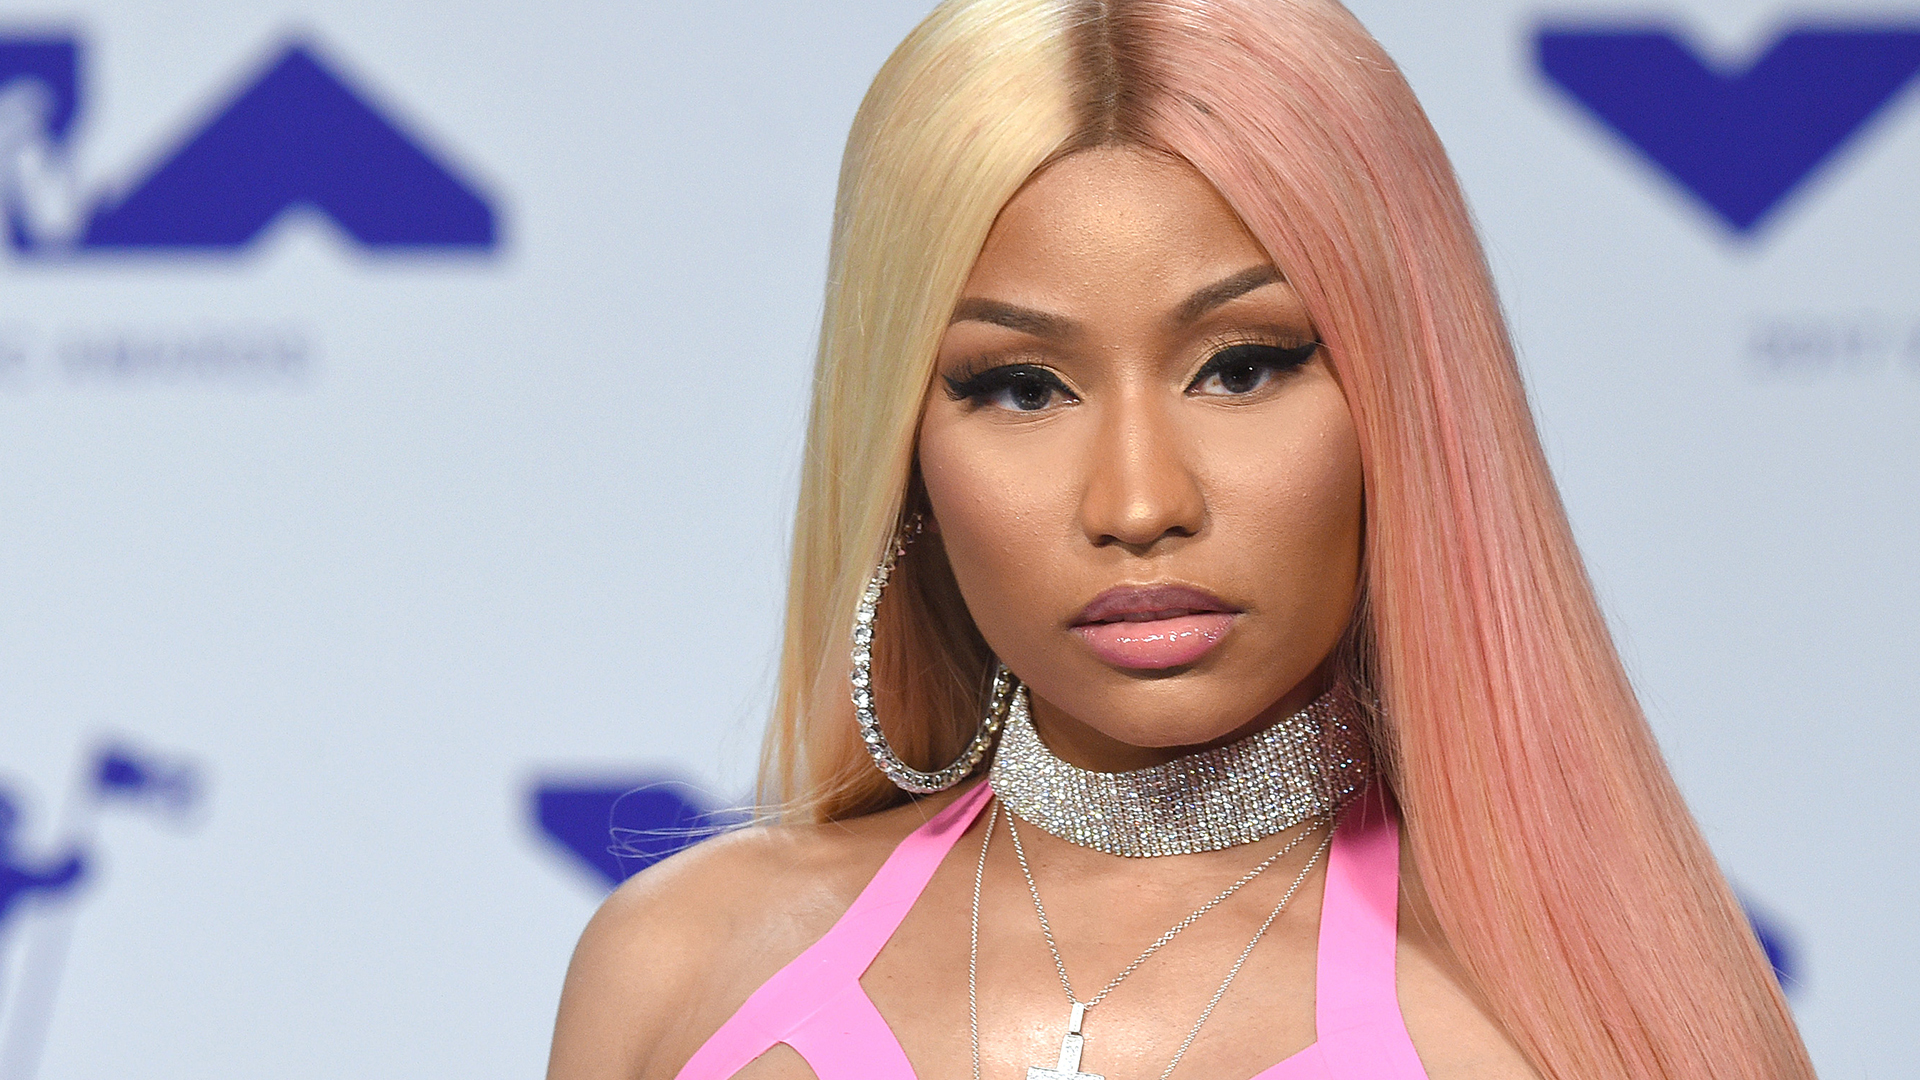 Nicki Minaj On Signing To Young Money: 'One Thing I Made Sure I Didn’t Do Was Sign A 360 Deal'